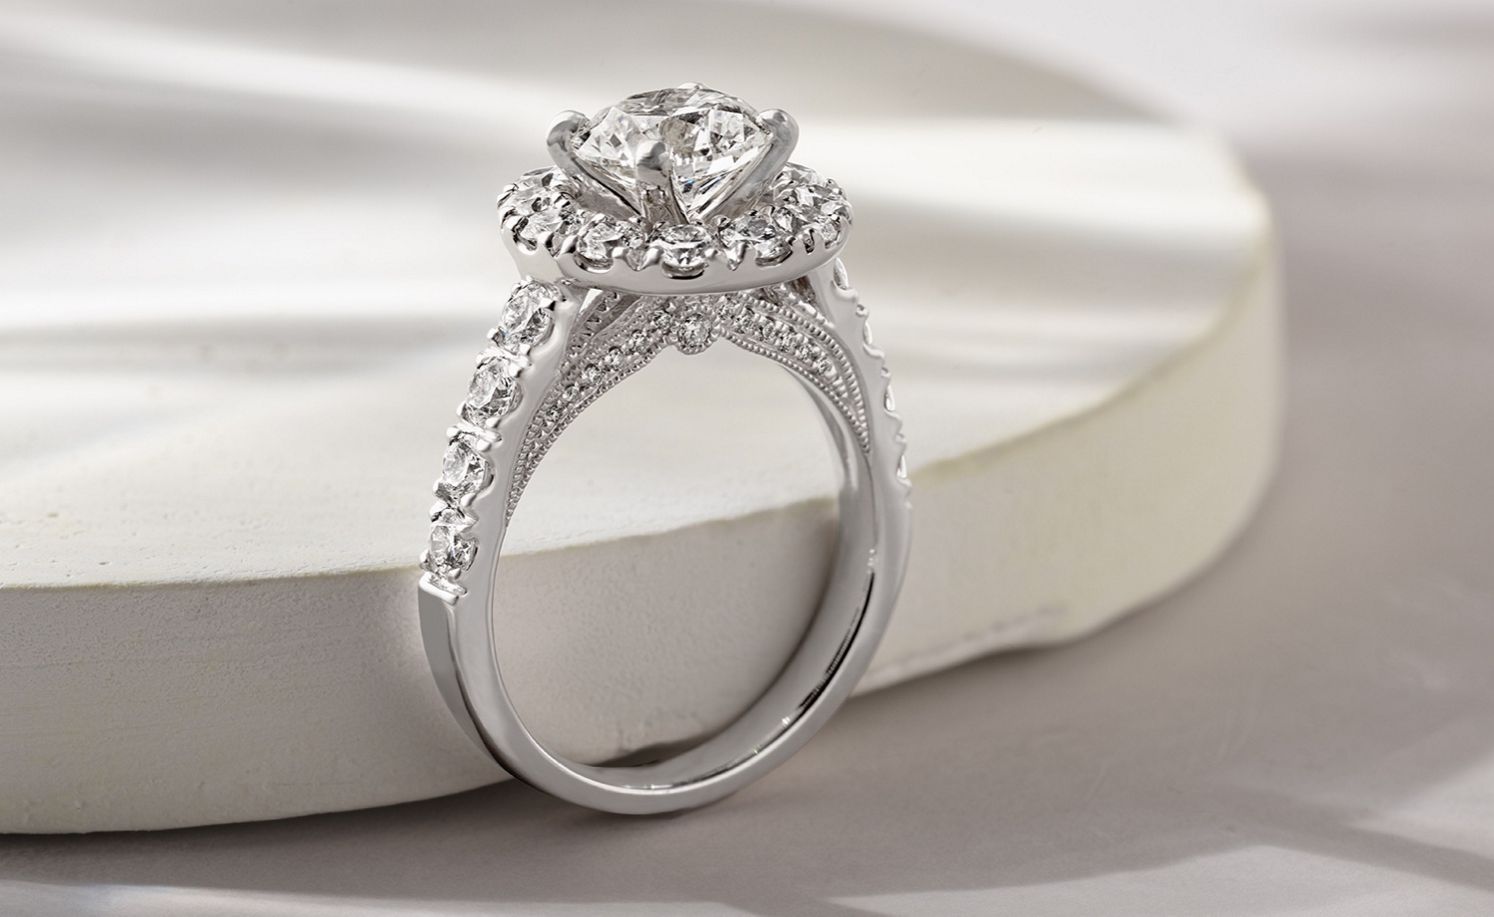 A white gold diamond engagement ring